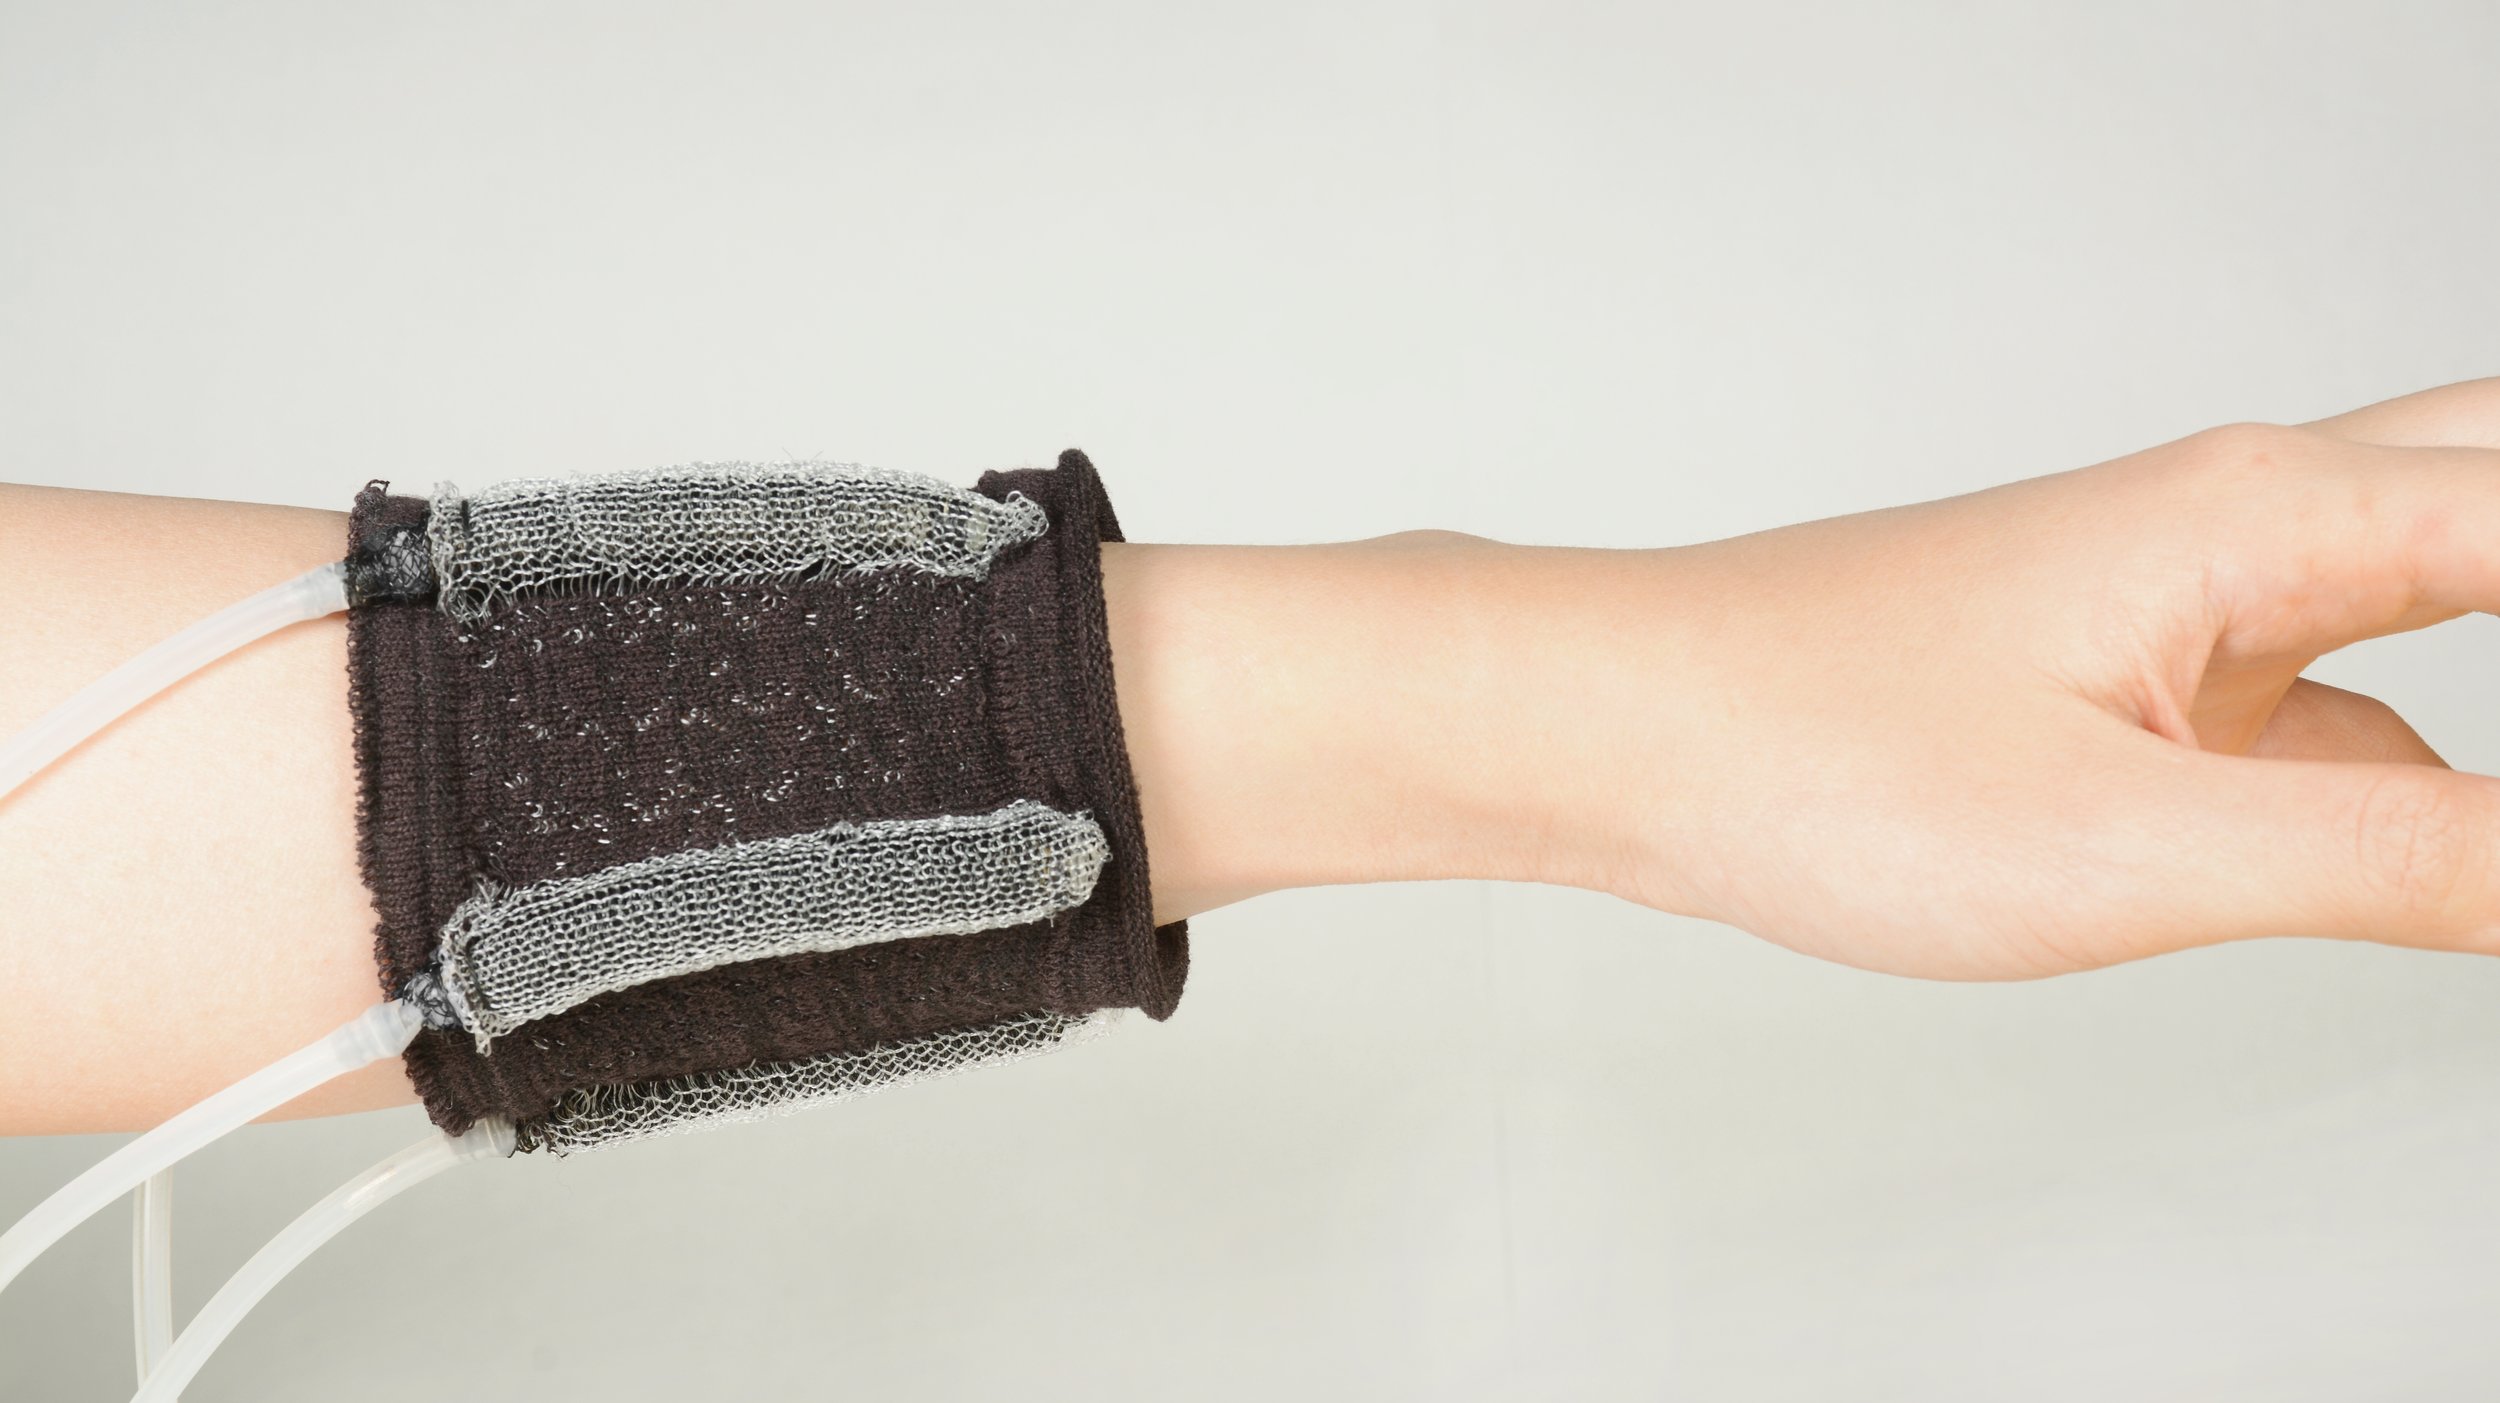  KnitSkin demonstrates potential as a wearable interface carrying a microphone. The interface locomotes down the arm to help a user pick up calls or send voice messages.&nbsp; (Photo: Hybrid Body Lab) 